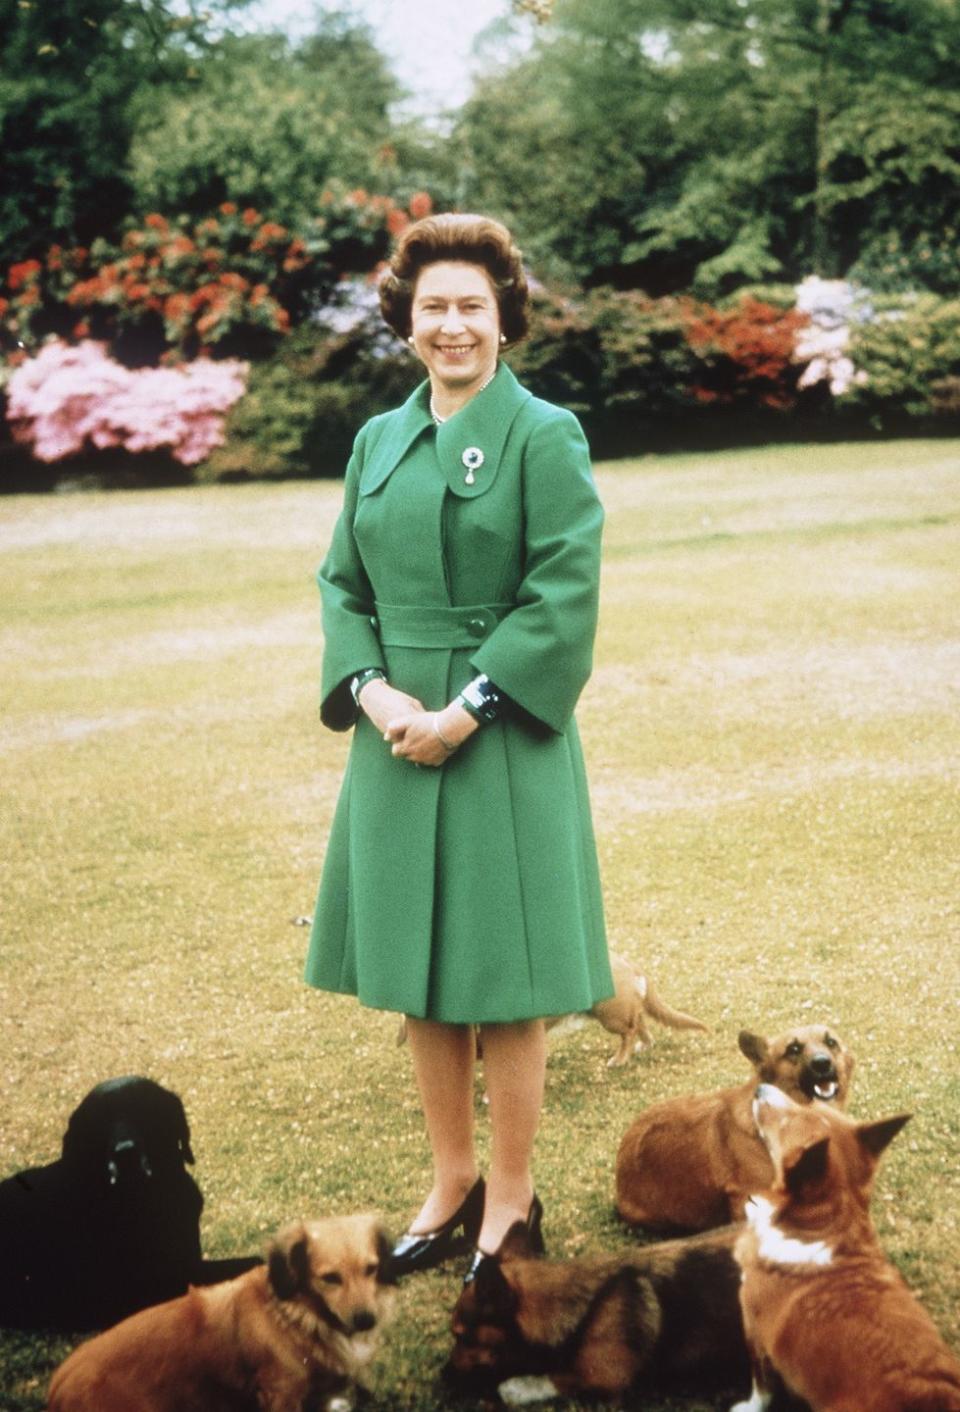 She introduced a new breed of dogs, dorgis, when one of her corgis mated with Princess Margaret's dachshund, Pipkin.